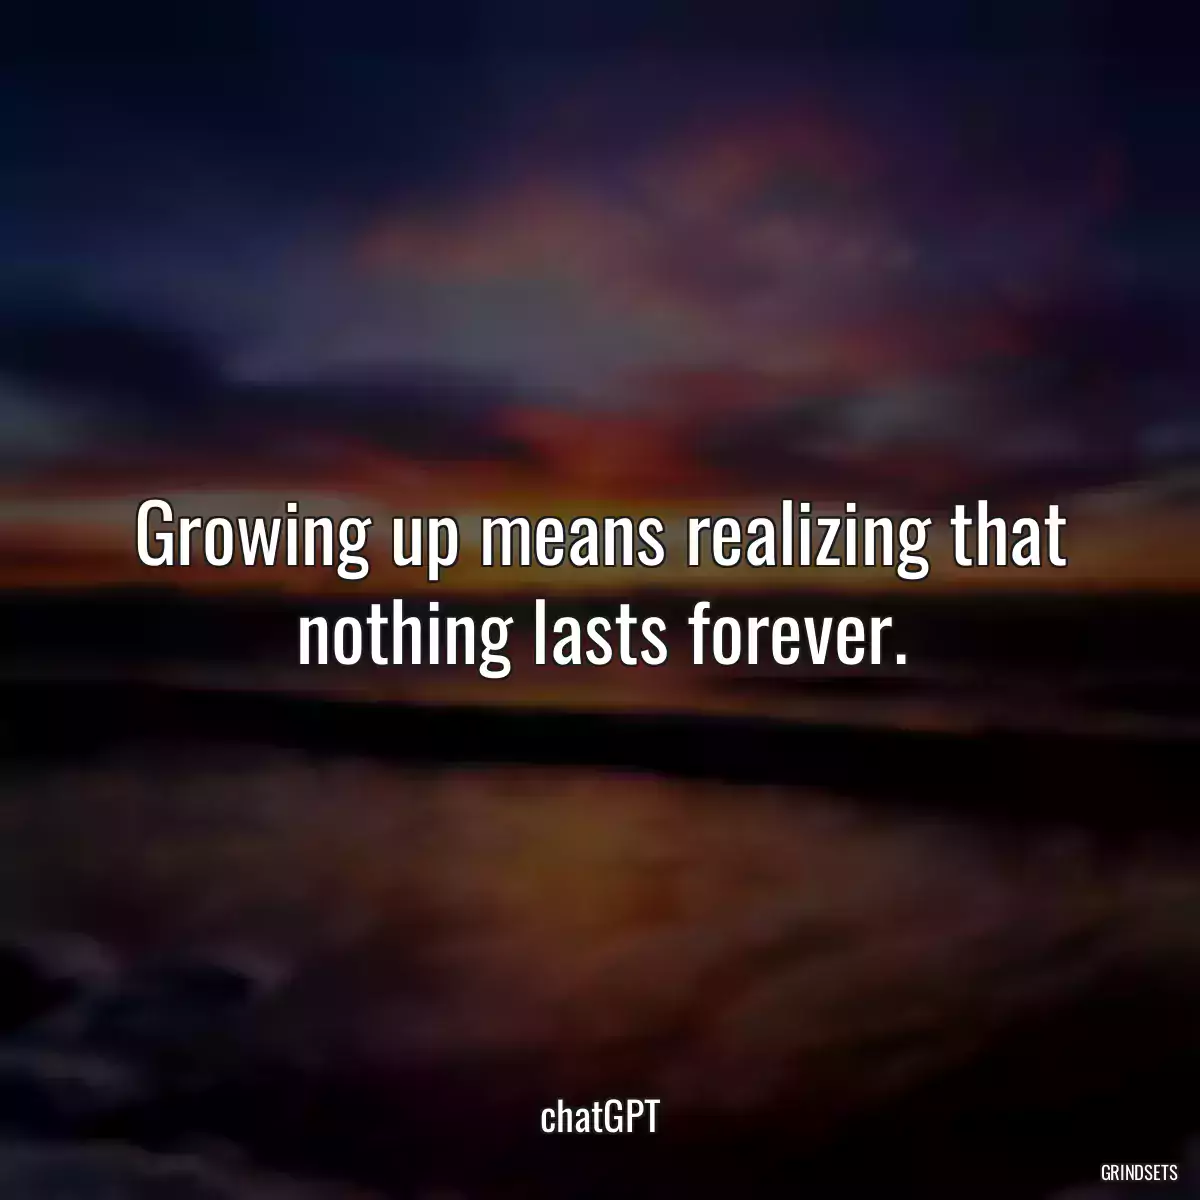 Growing up means realizing that nothing lasts forever.